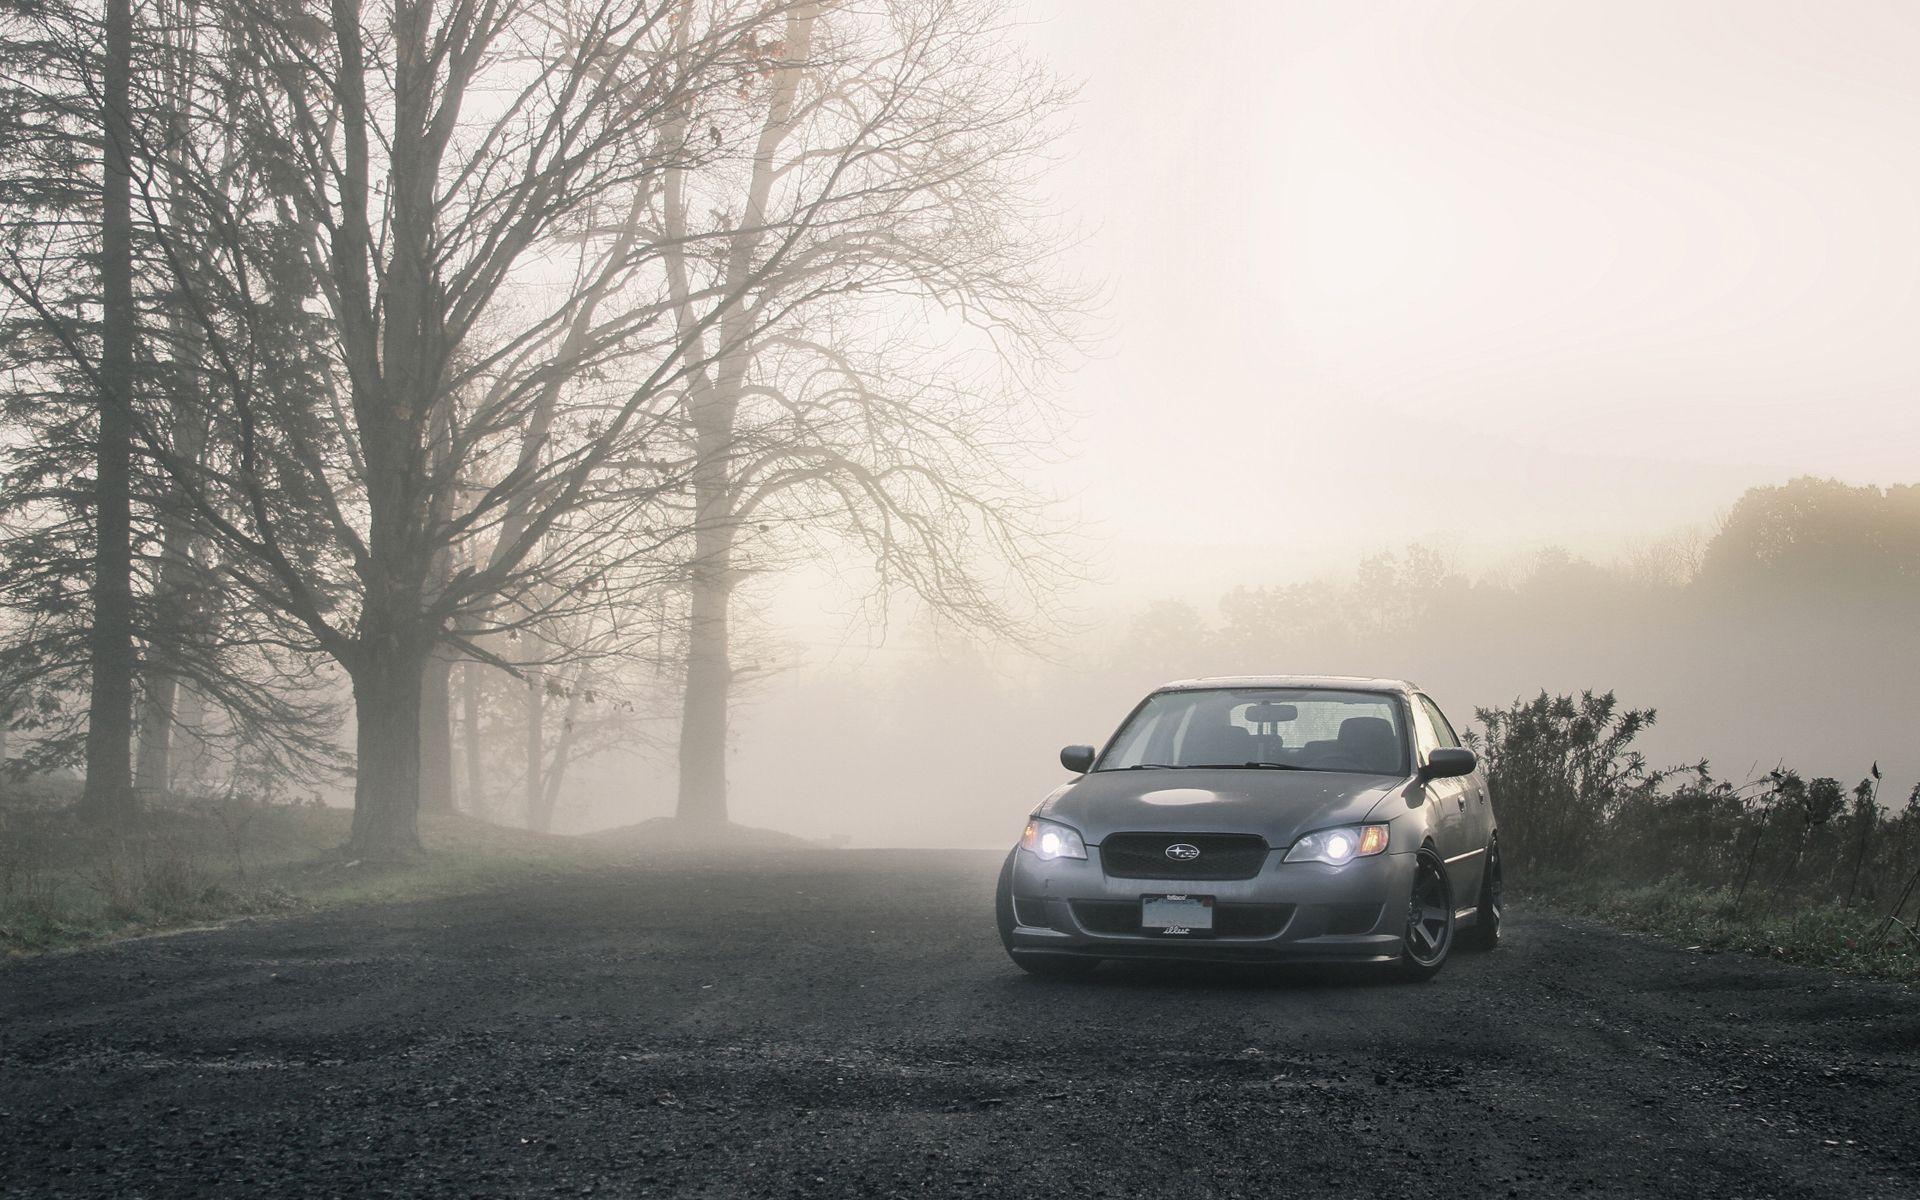 Subaru Legacy wallpaper and image, picture, photo